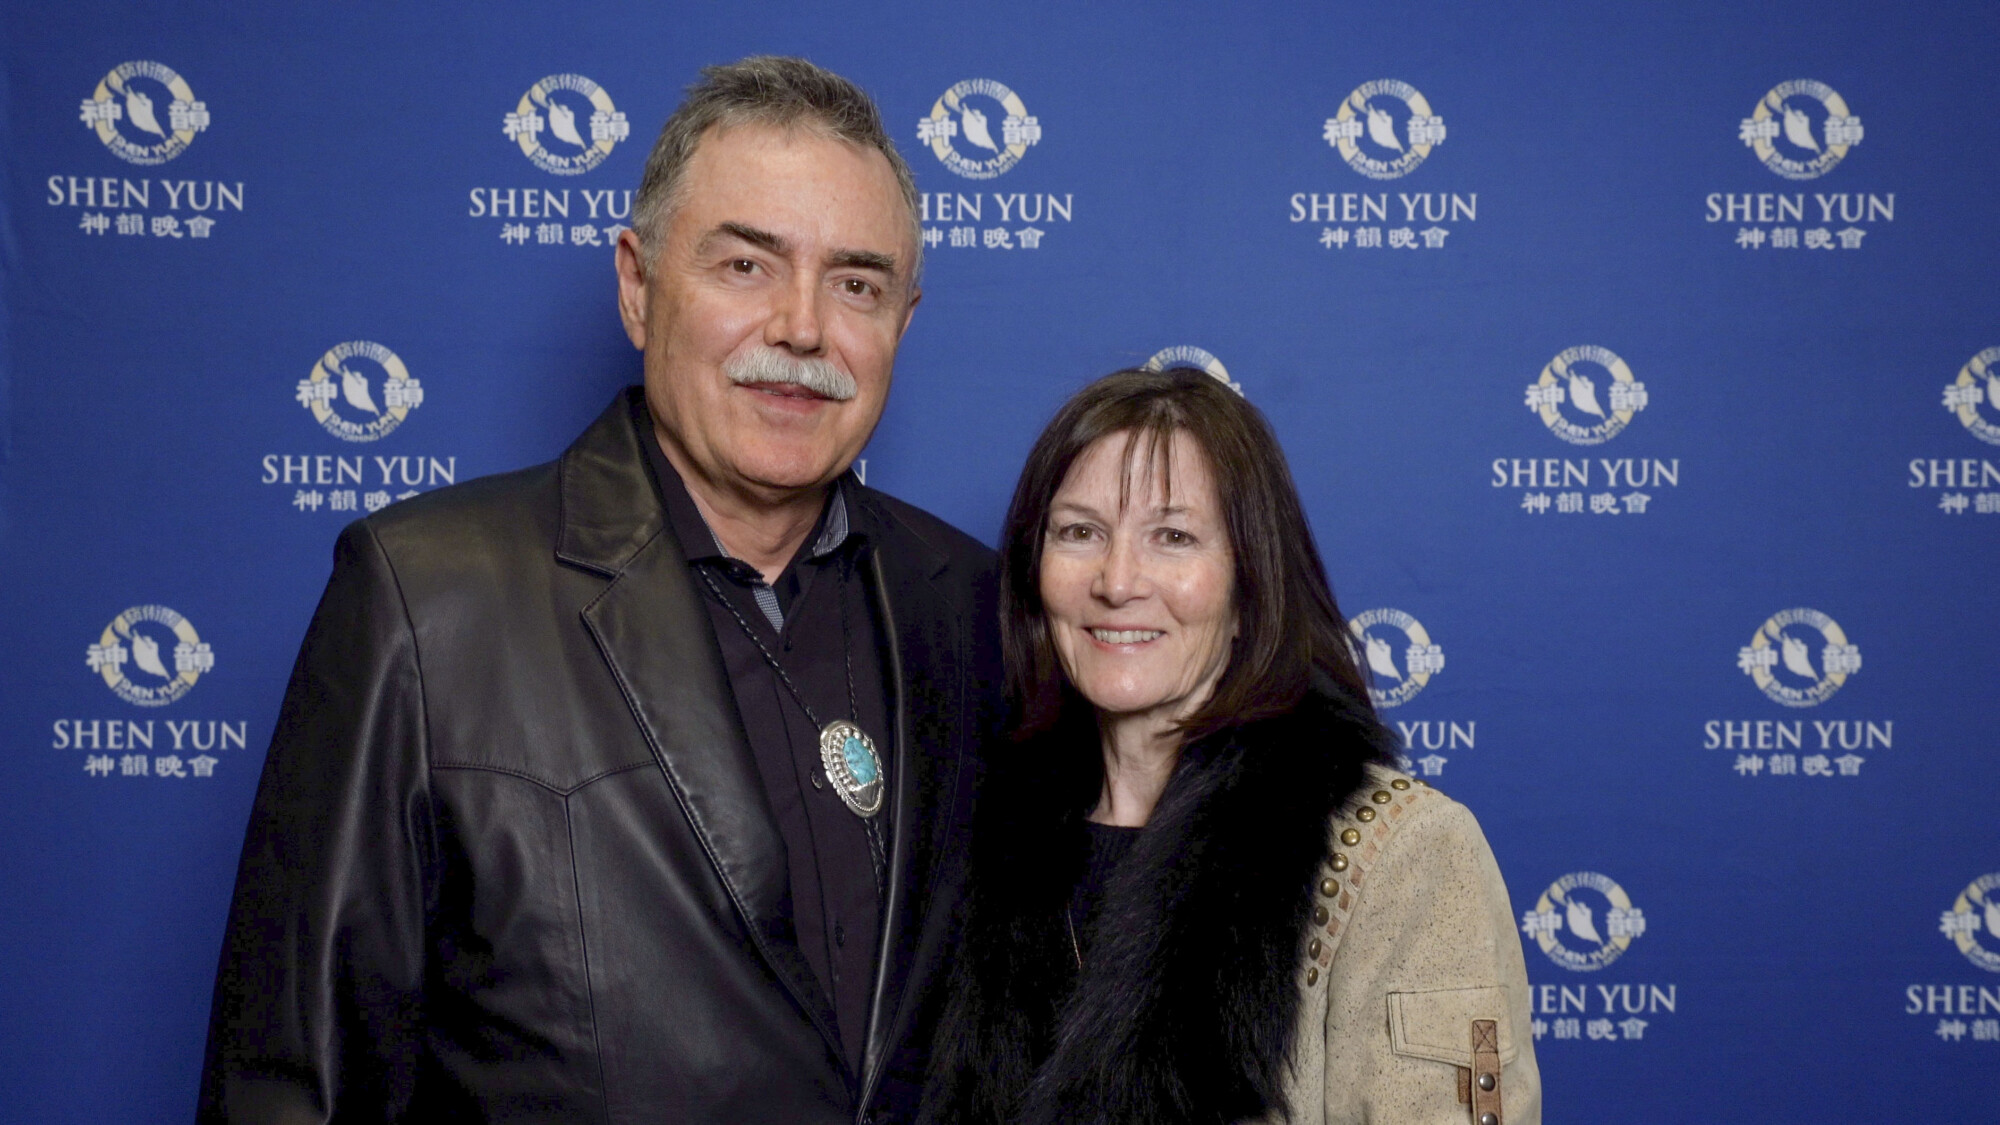 Pilot Feels 'Uplifted' and 'Happier' After Shen Yun